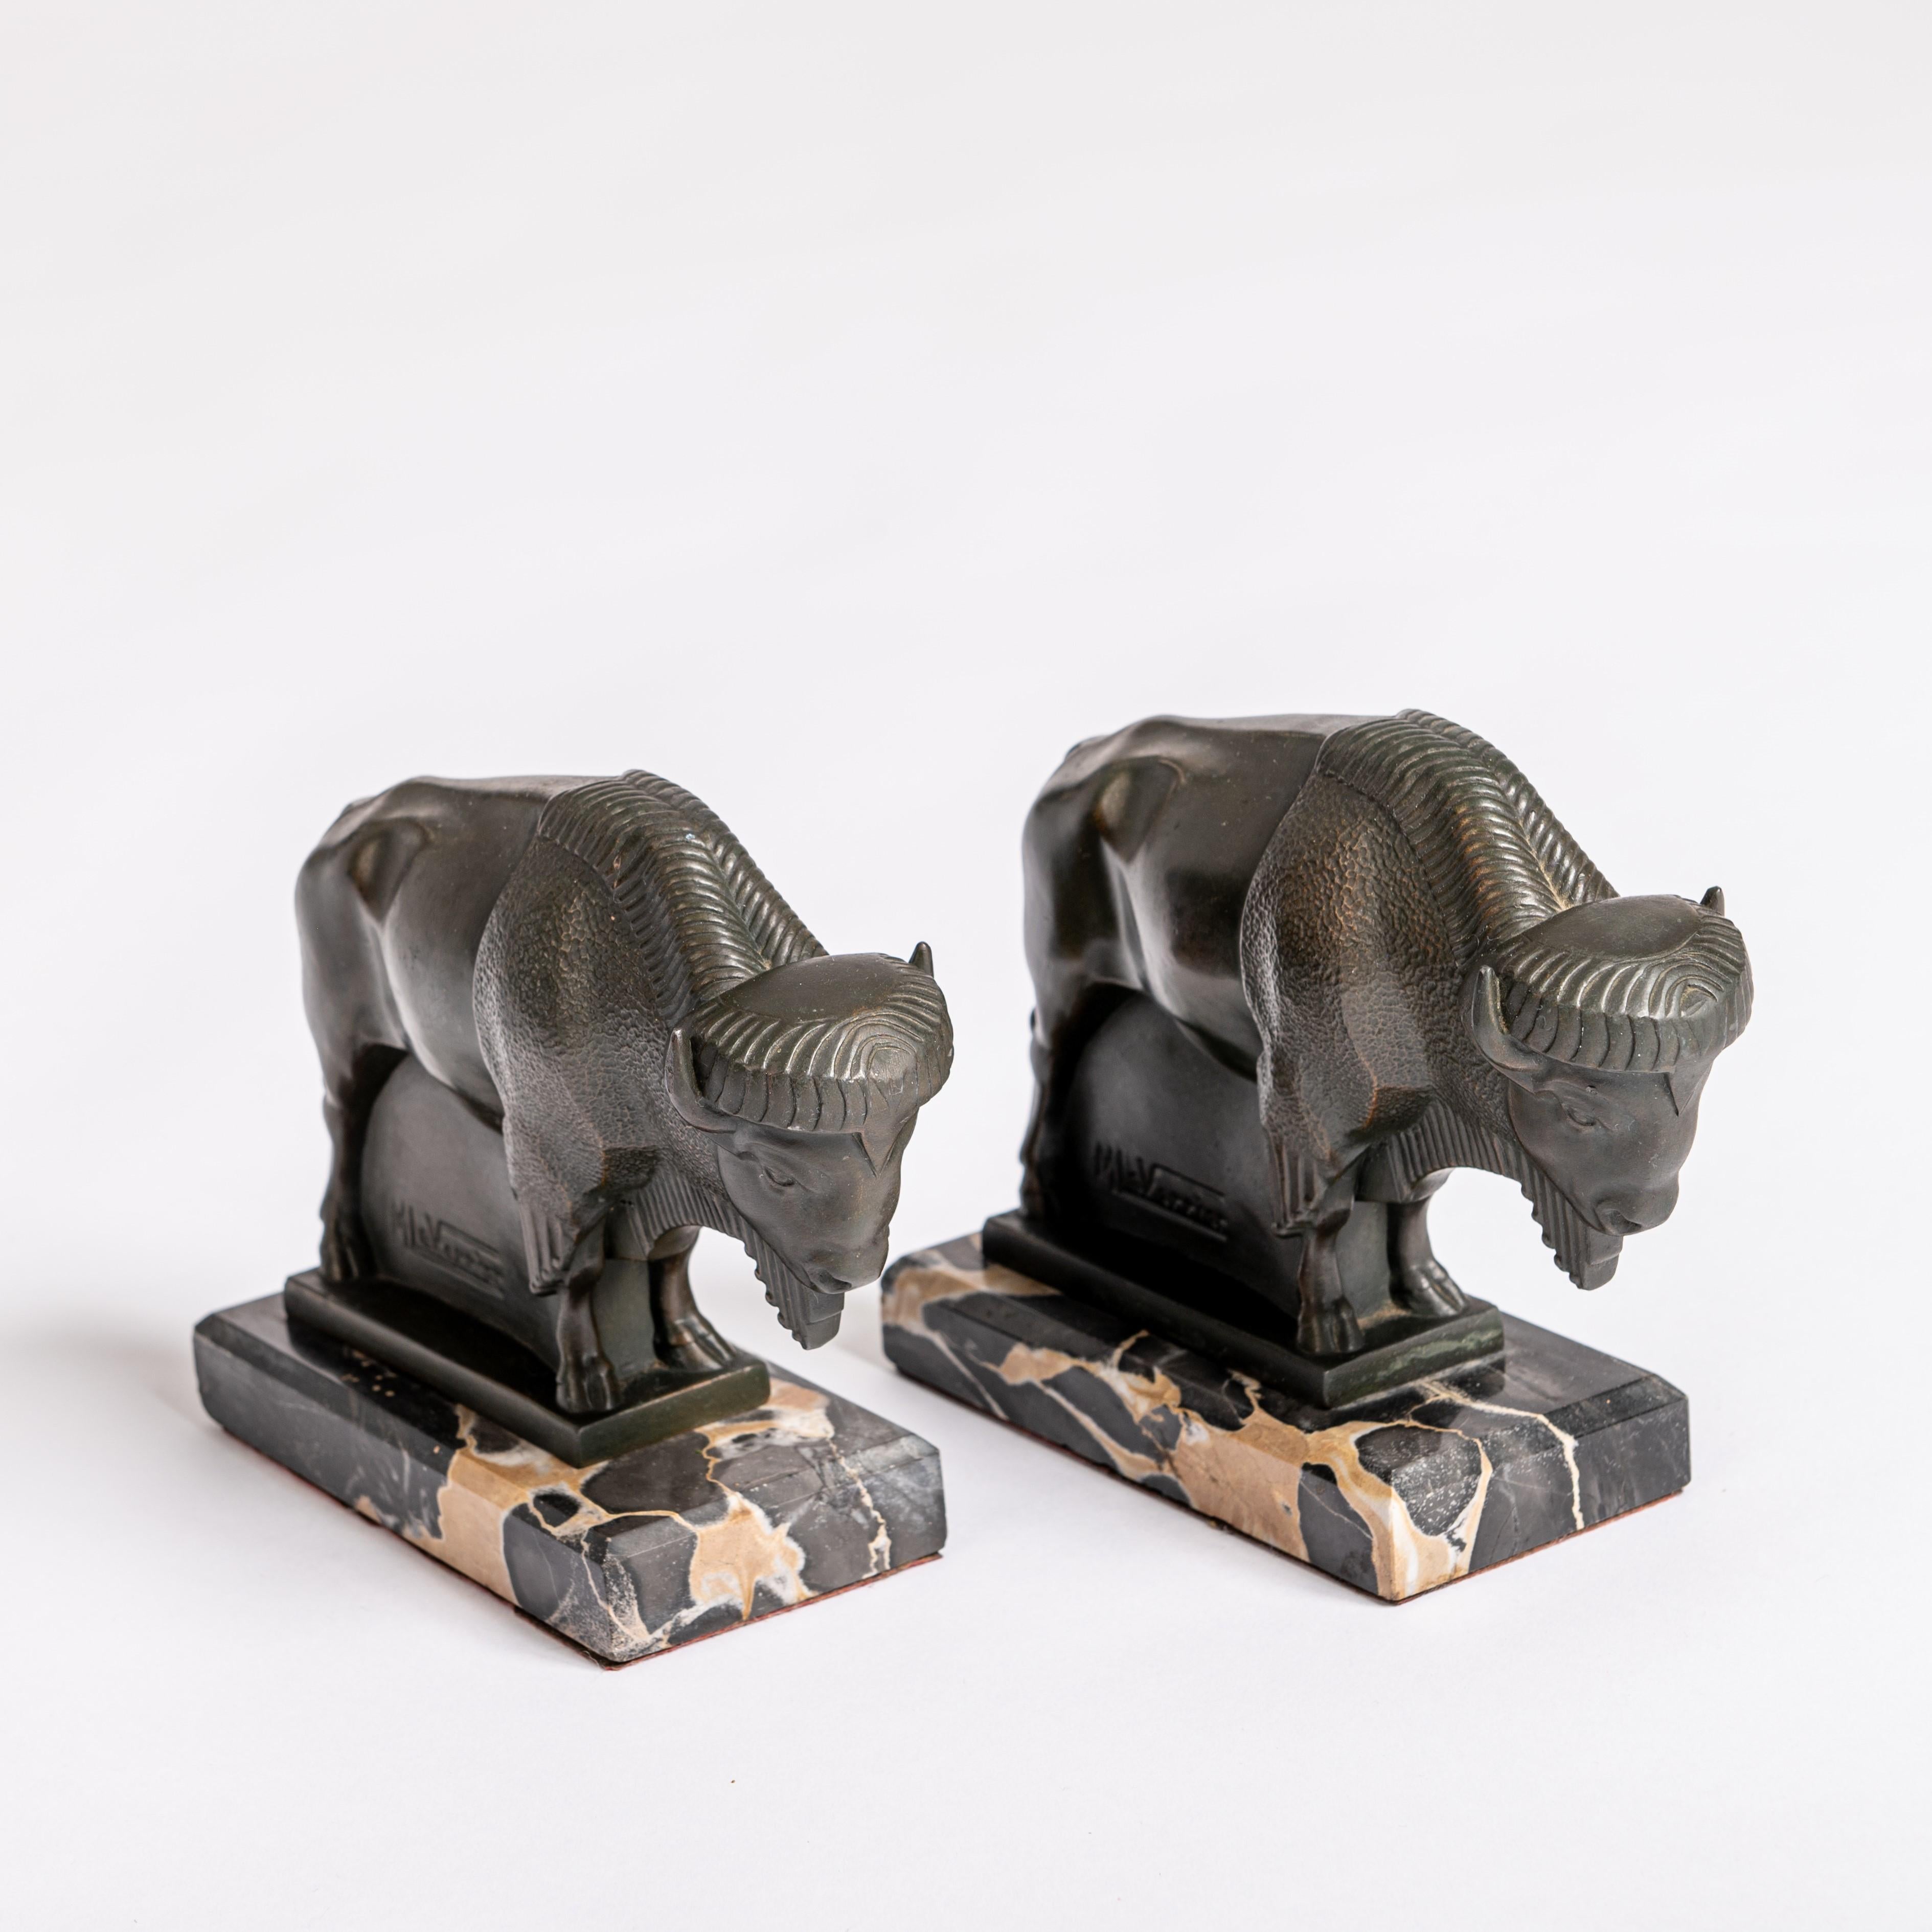 Extremely decorative and very finely designed cubic Art Deco bookends by Max Le Verrier.
Clear and strict depiction of bison in green bronze on a black and cream colored marble base.

Louis Octave Maxime Le Verrier, short Max Le Verrier (born